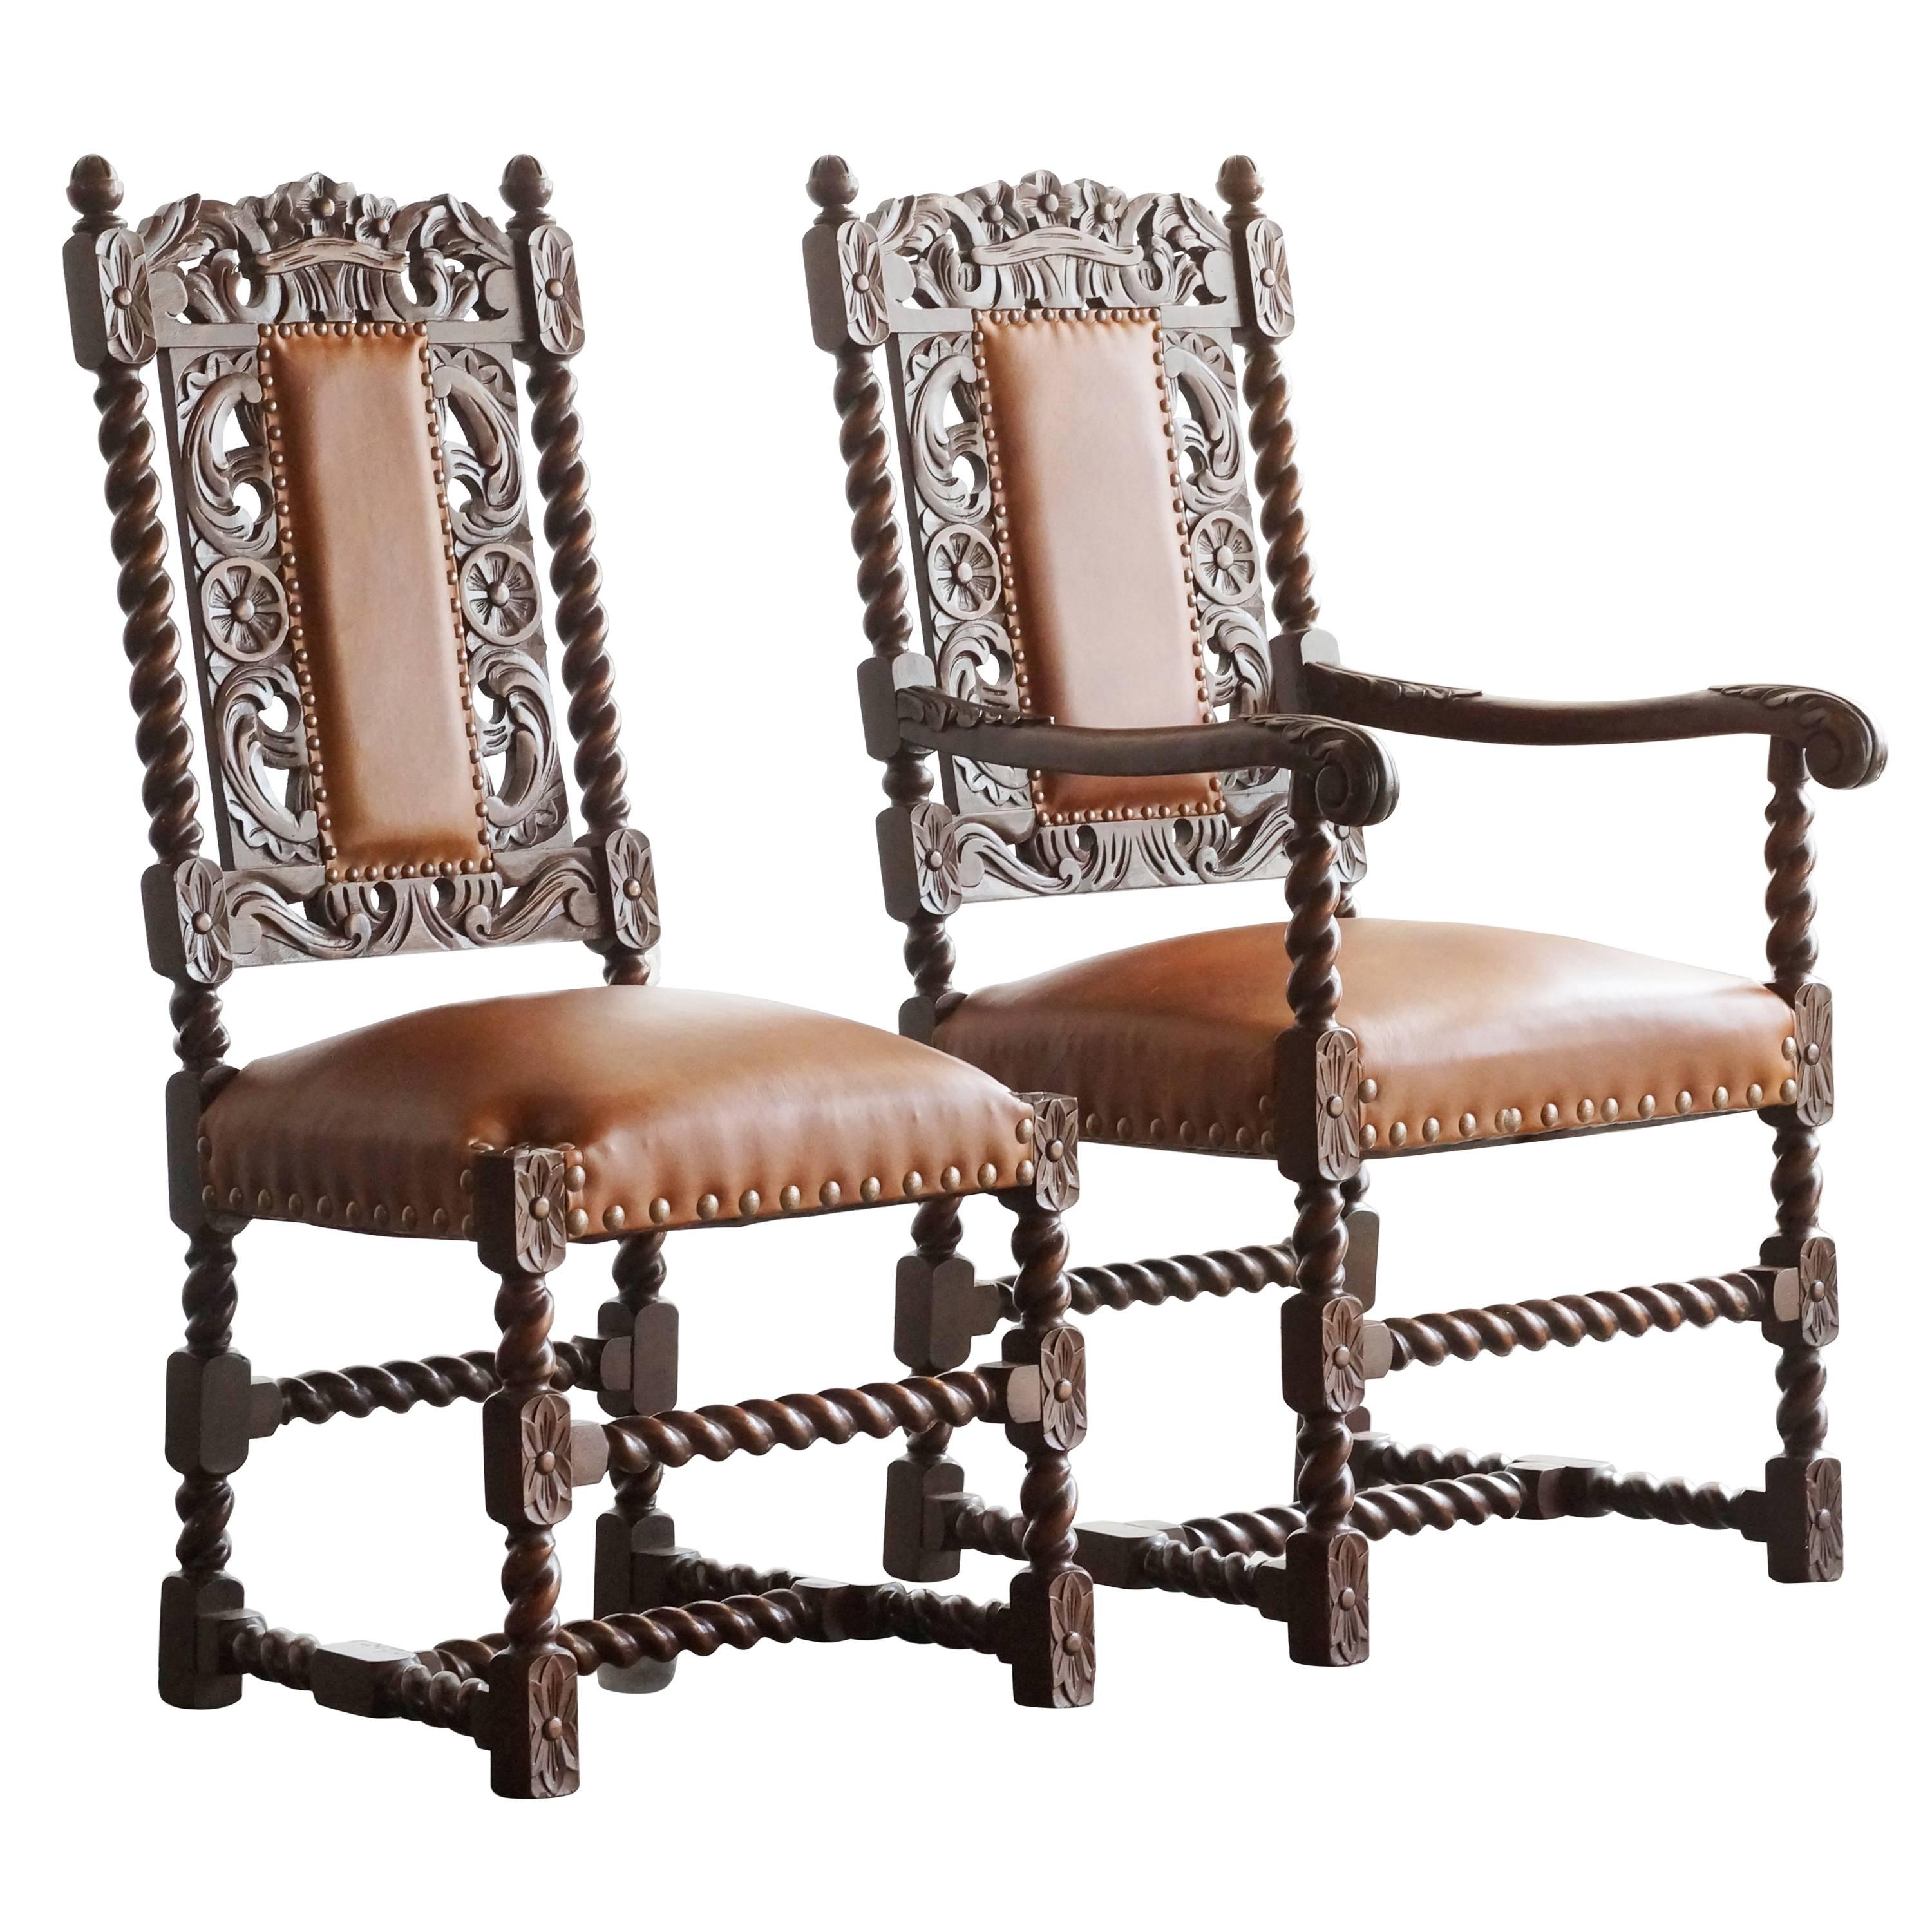 Pair of Antique Spanish Colonial Style Barley Twist Chairs. 1890s